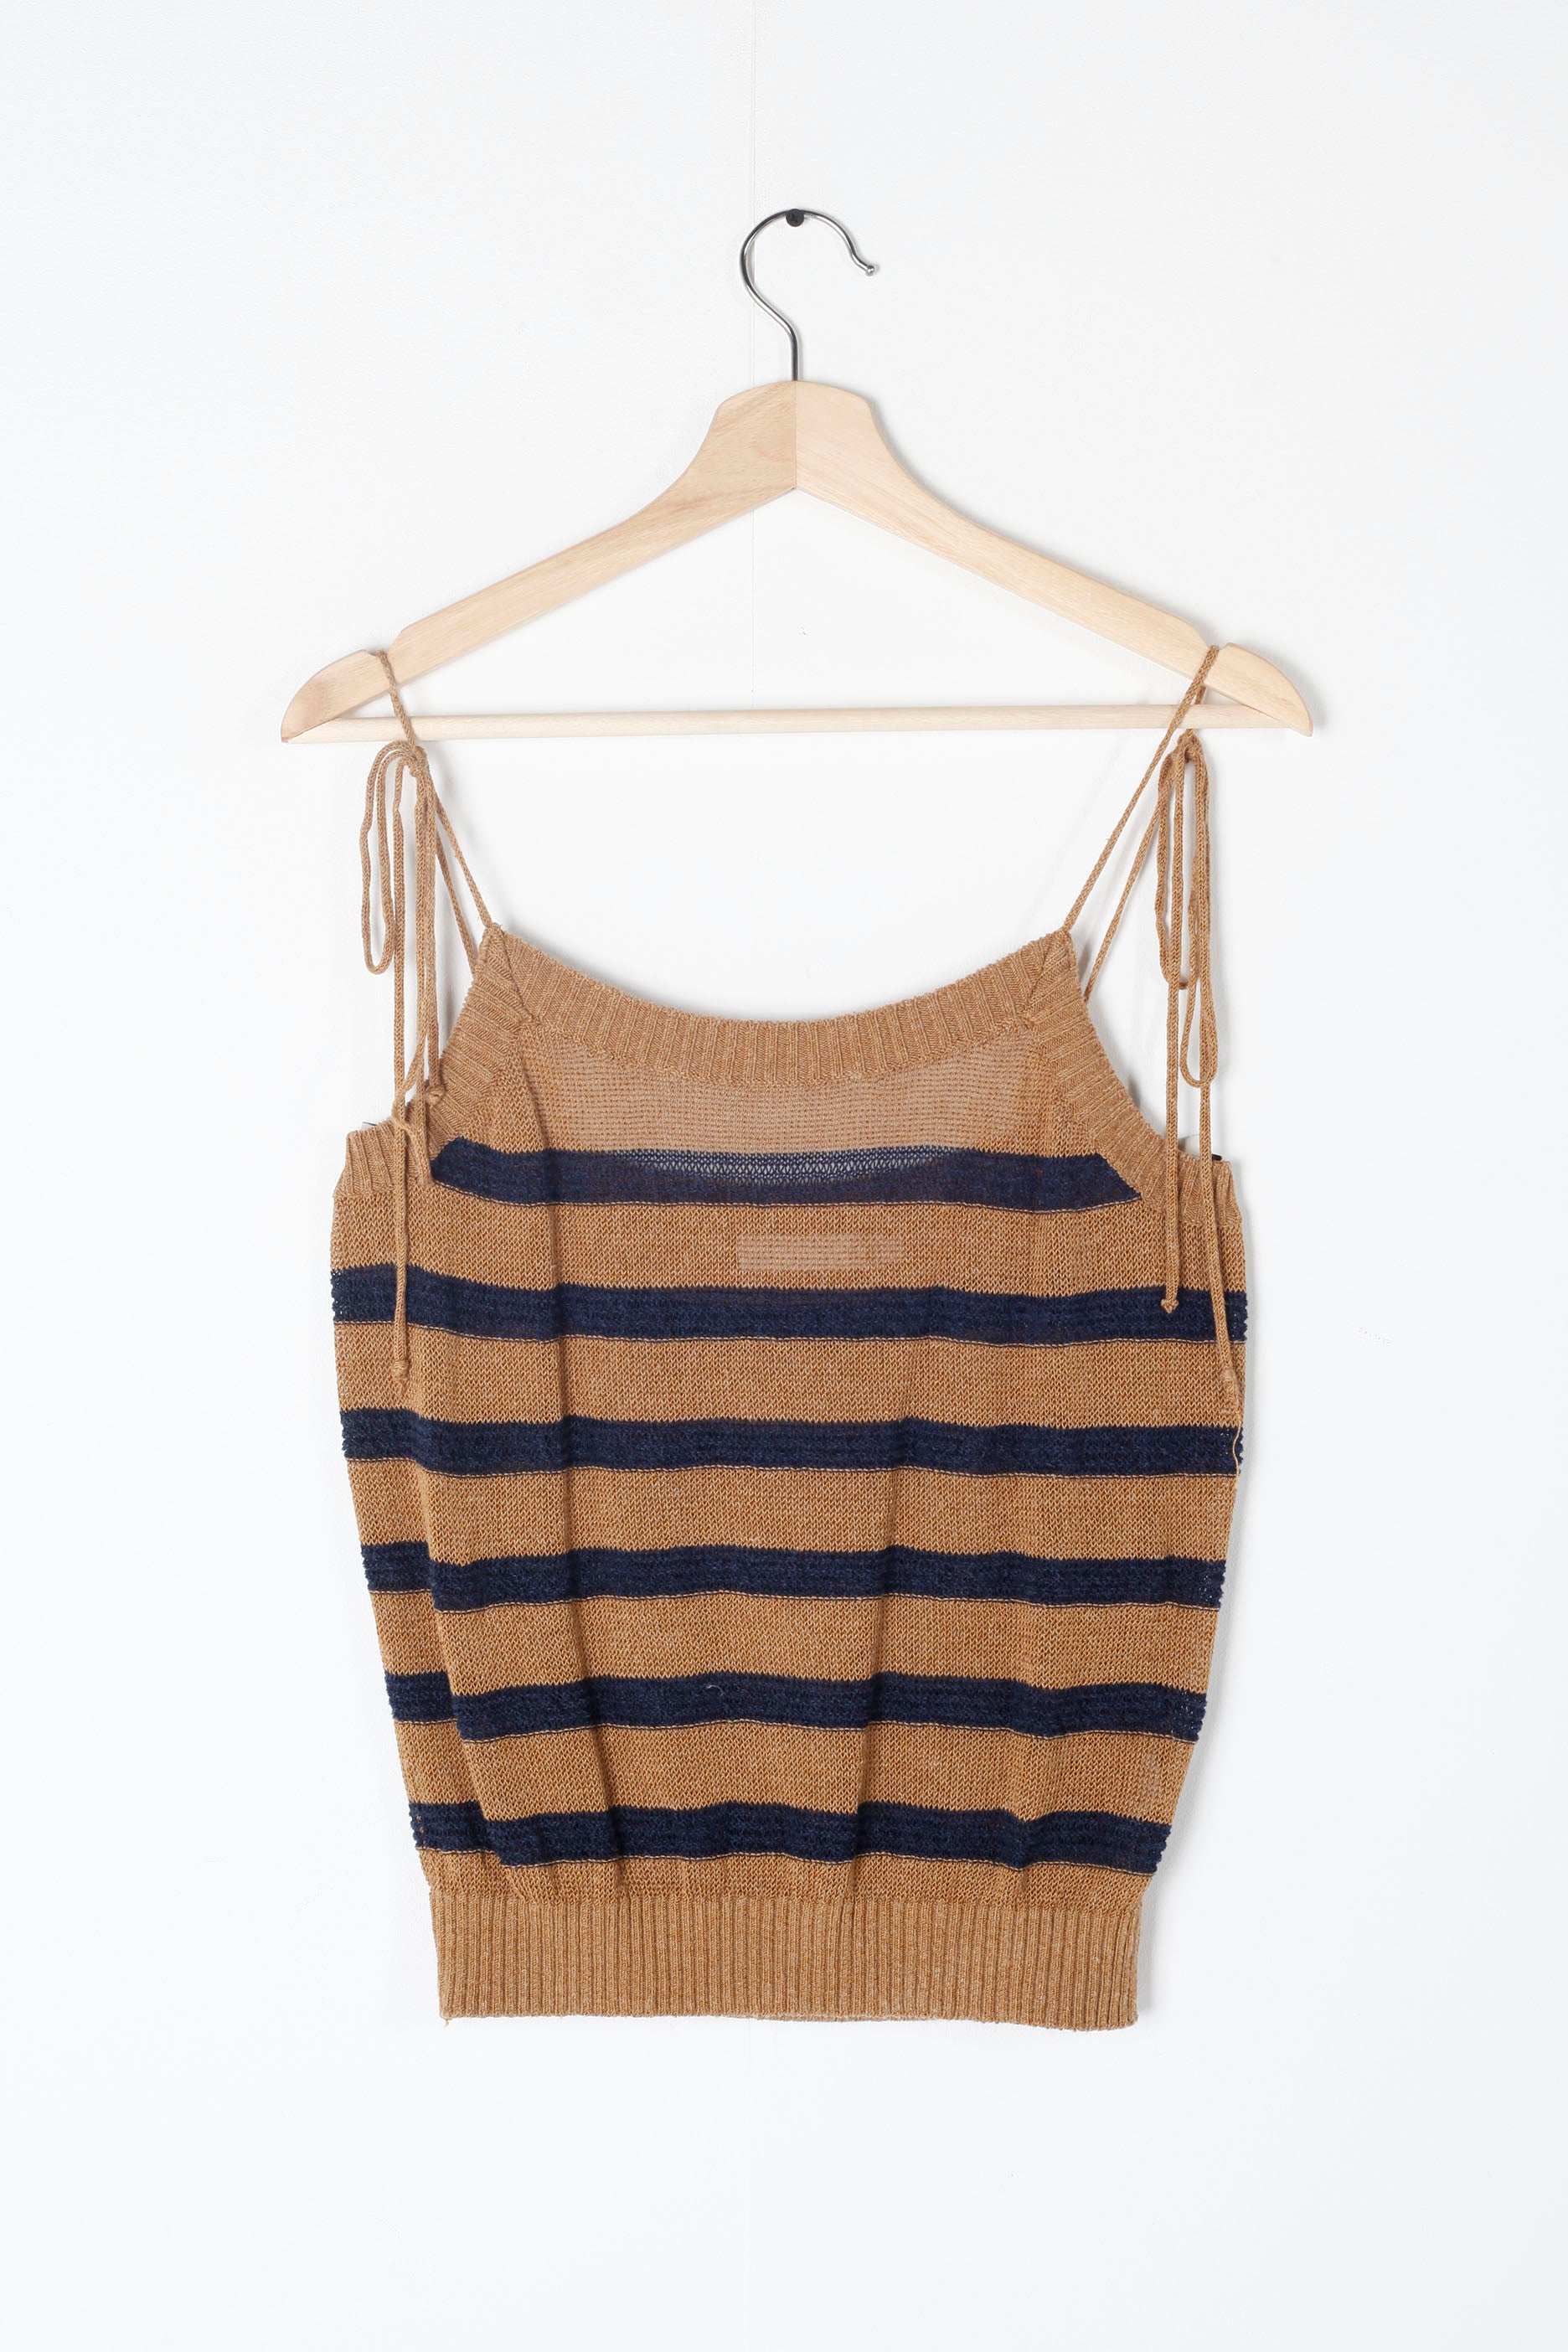 Retro Striped Knitted Camisole Vest